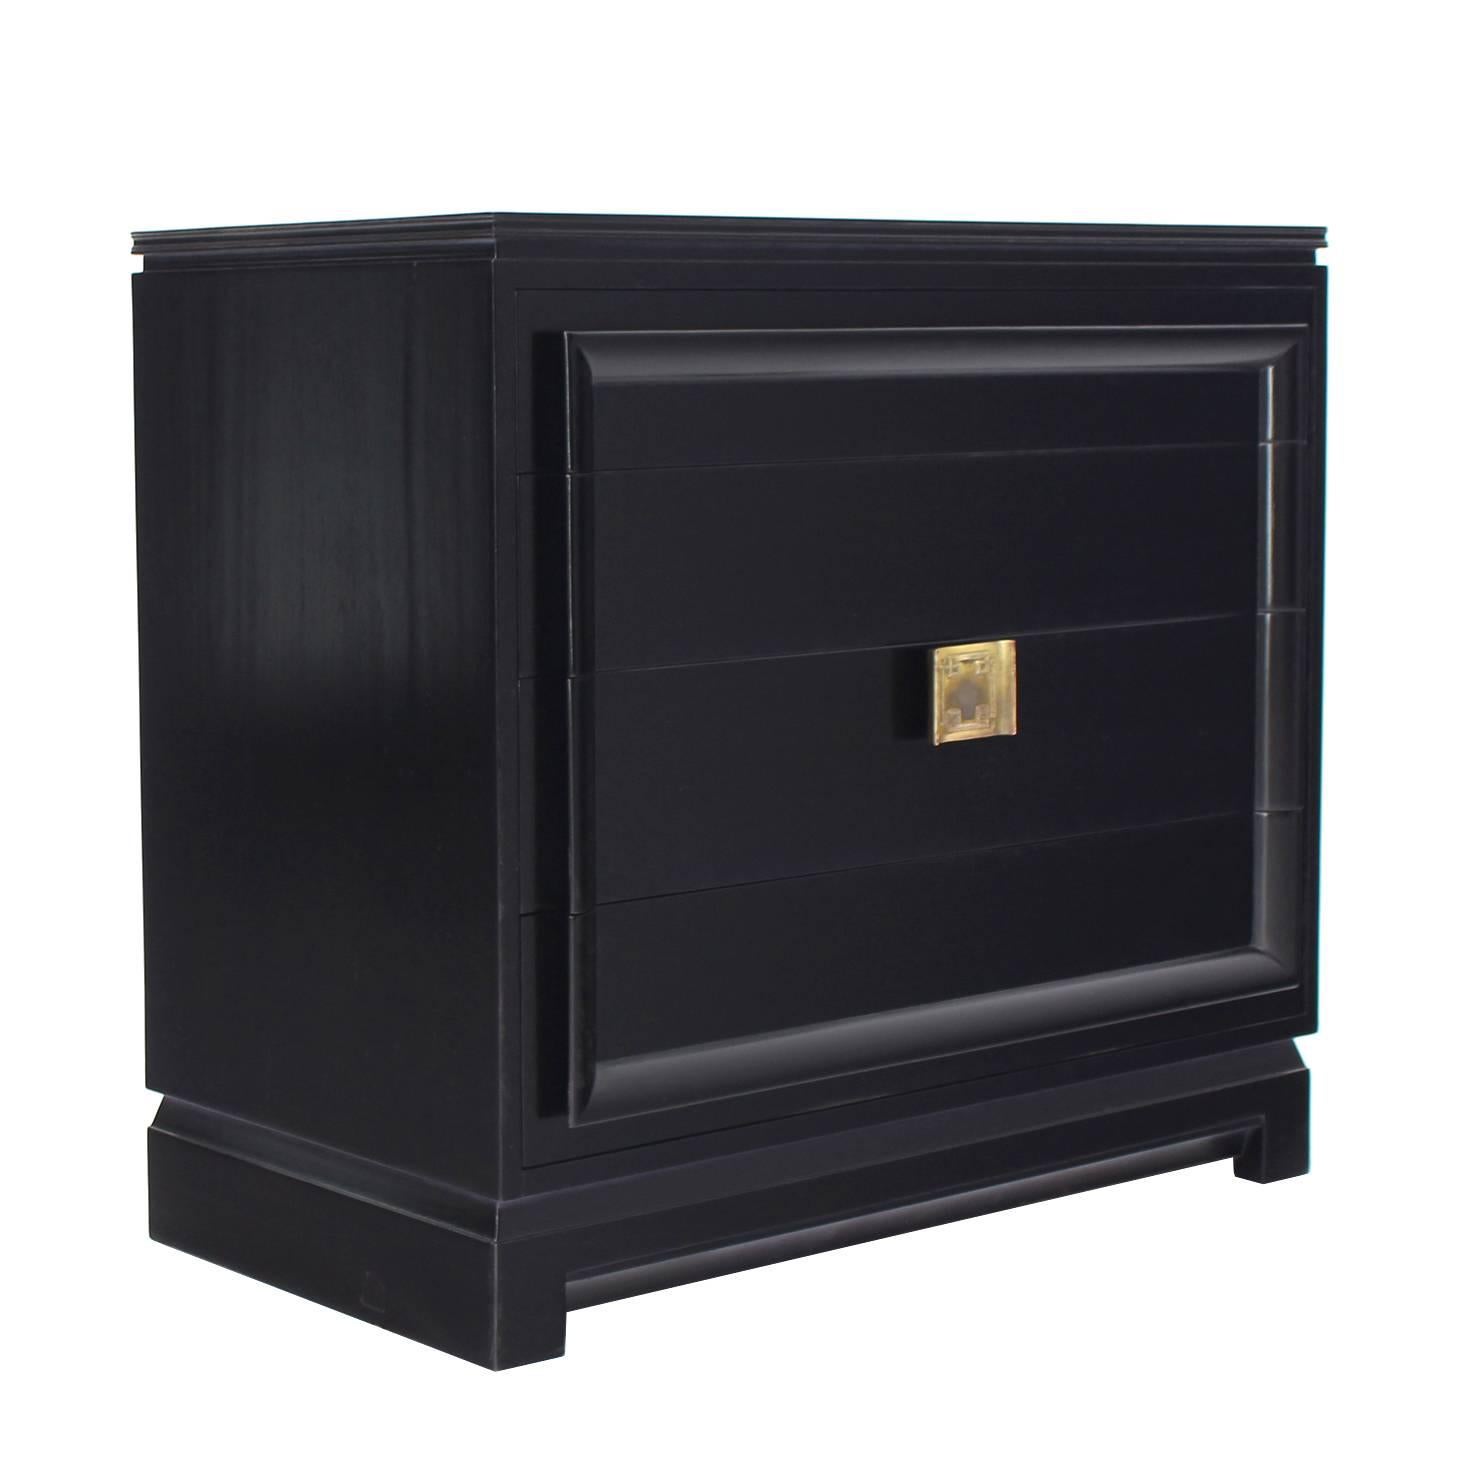 Black Lacquer Four Drawer Bachelor Chest In Excellent Condition For Sale In Rockaway, NJ